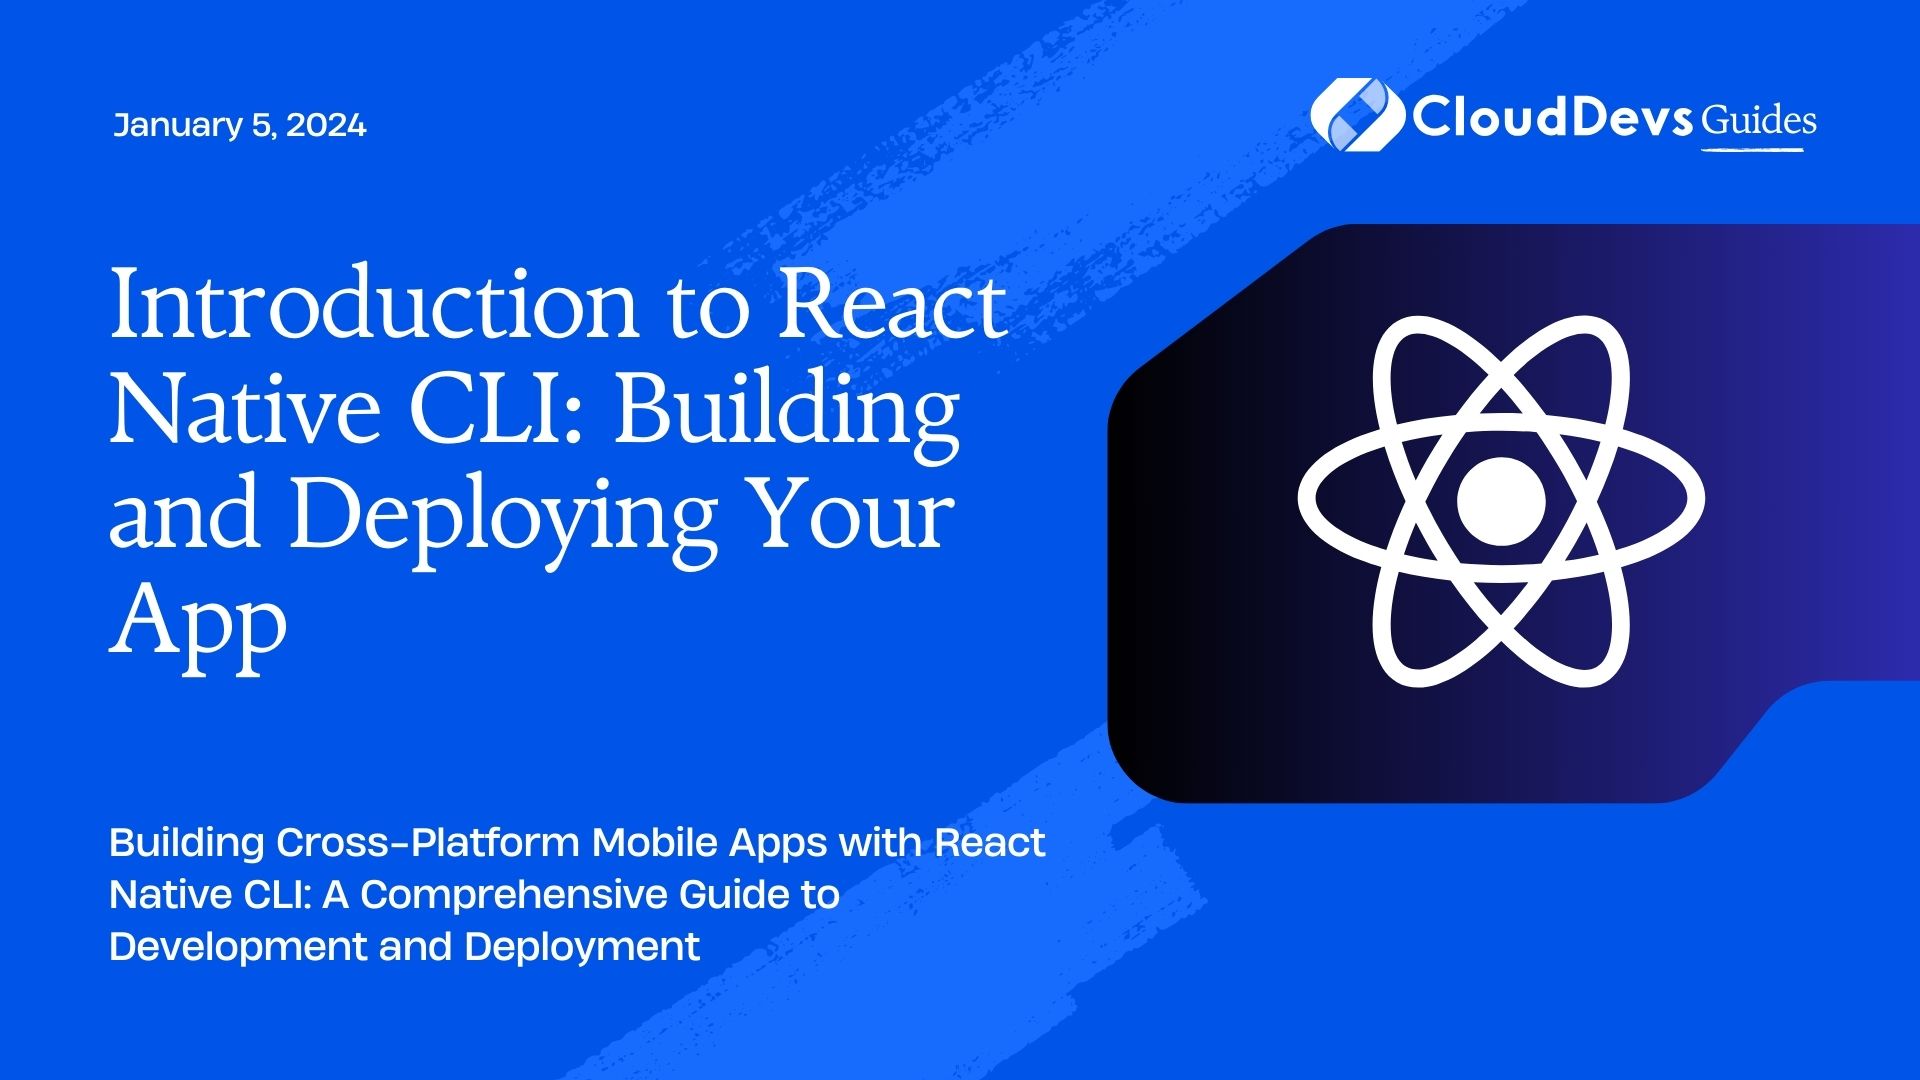 Introduction to React Native CLI: Building and Deploying Your App